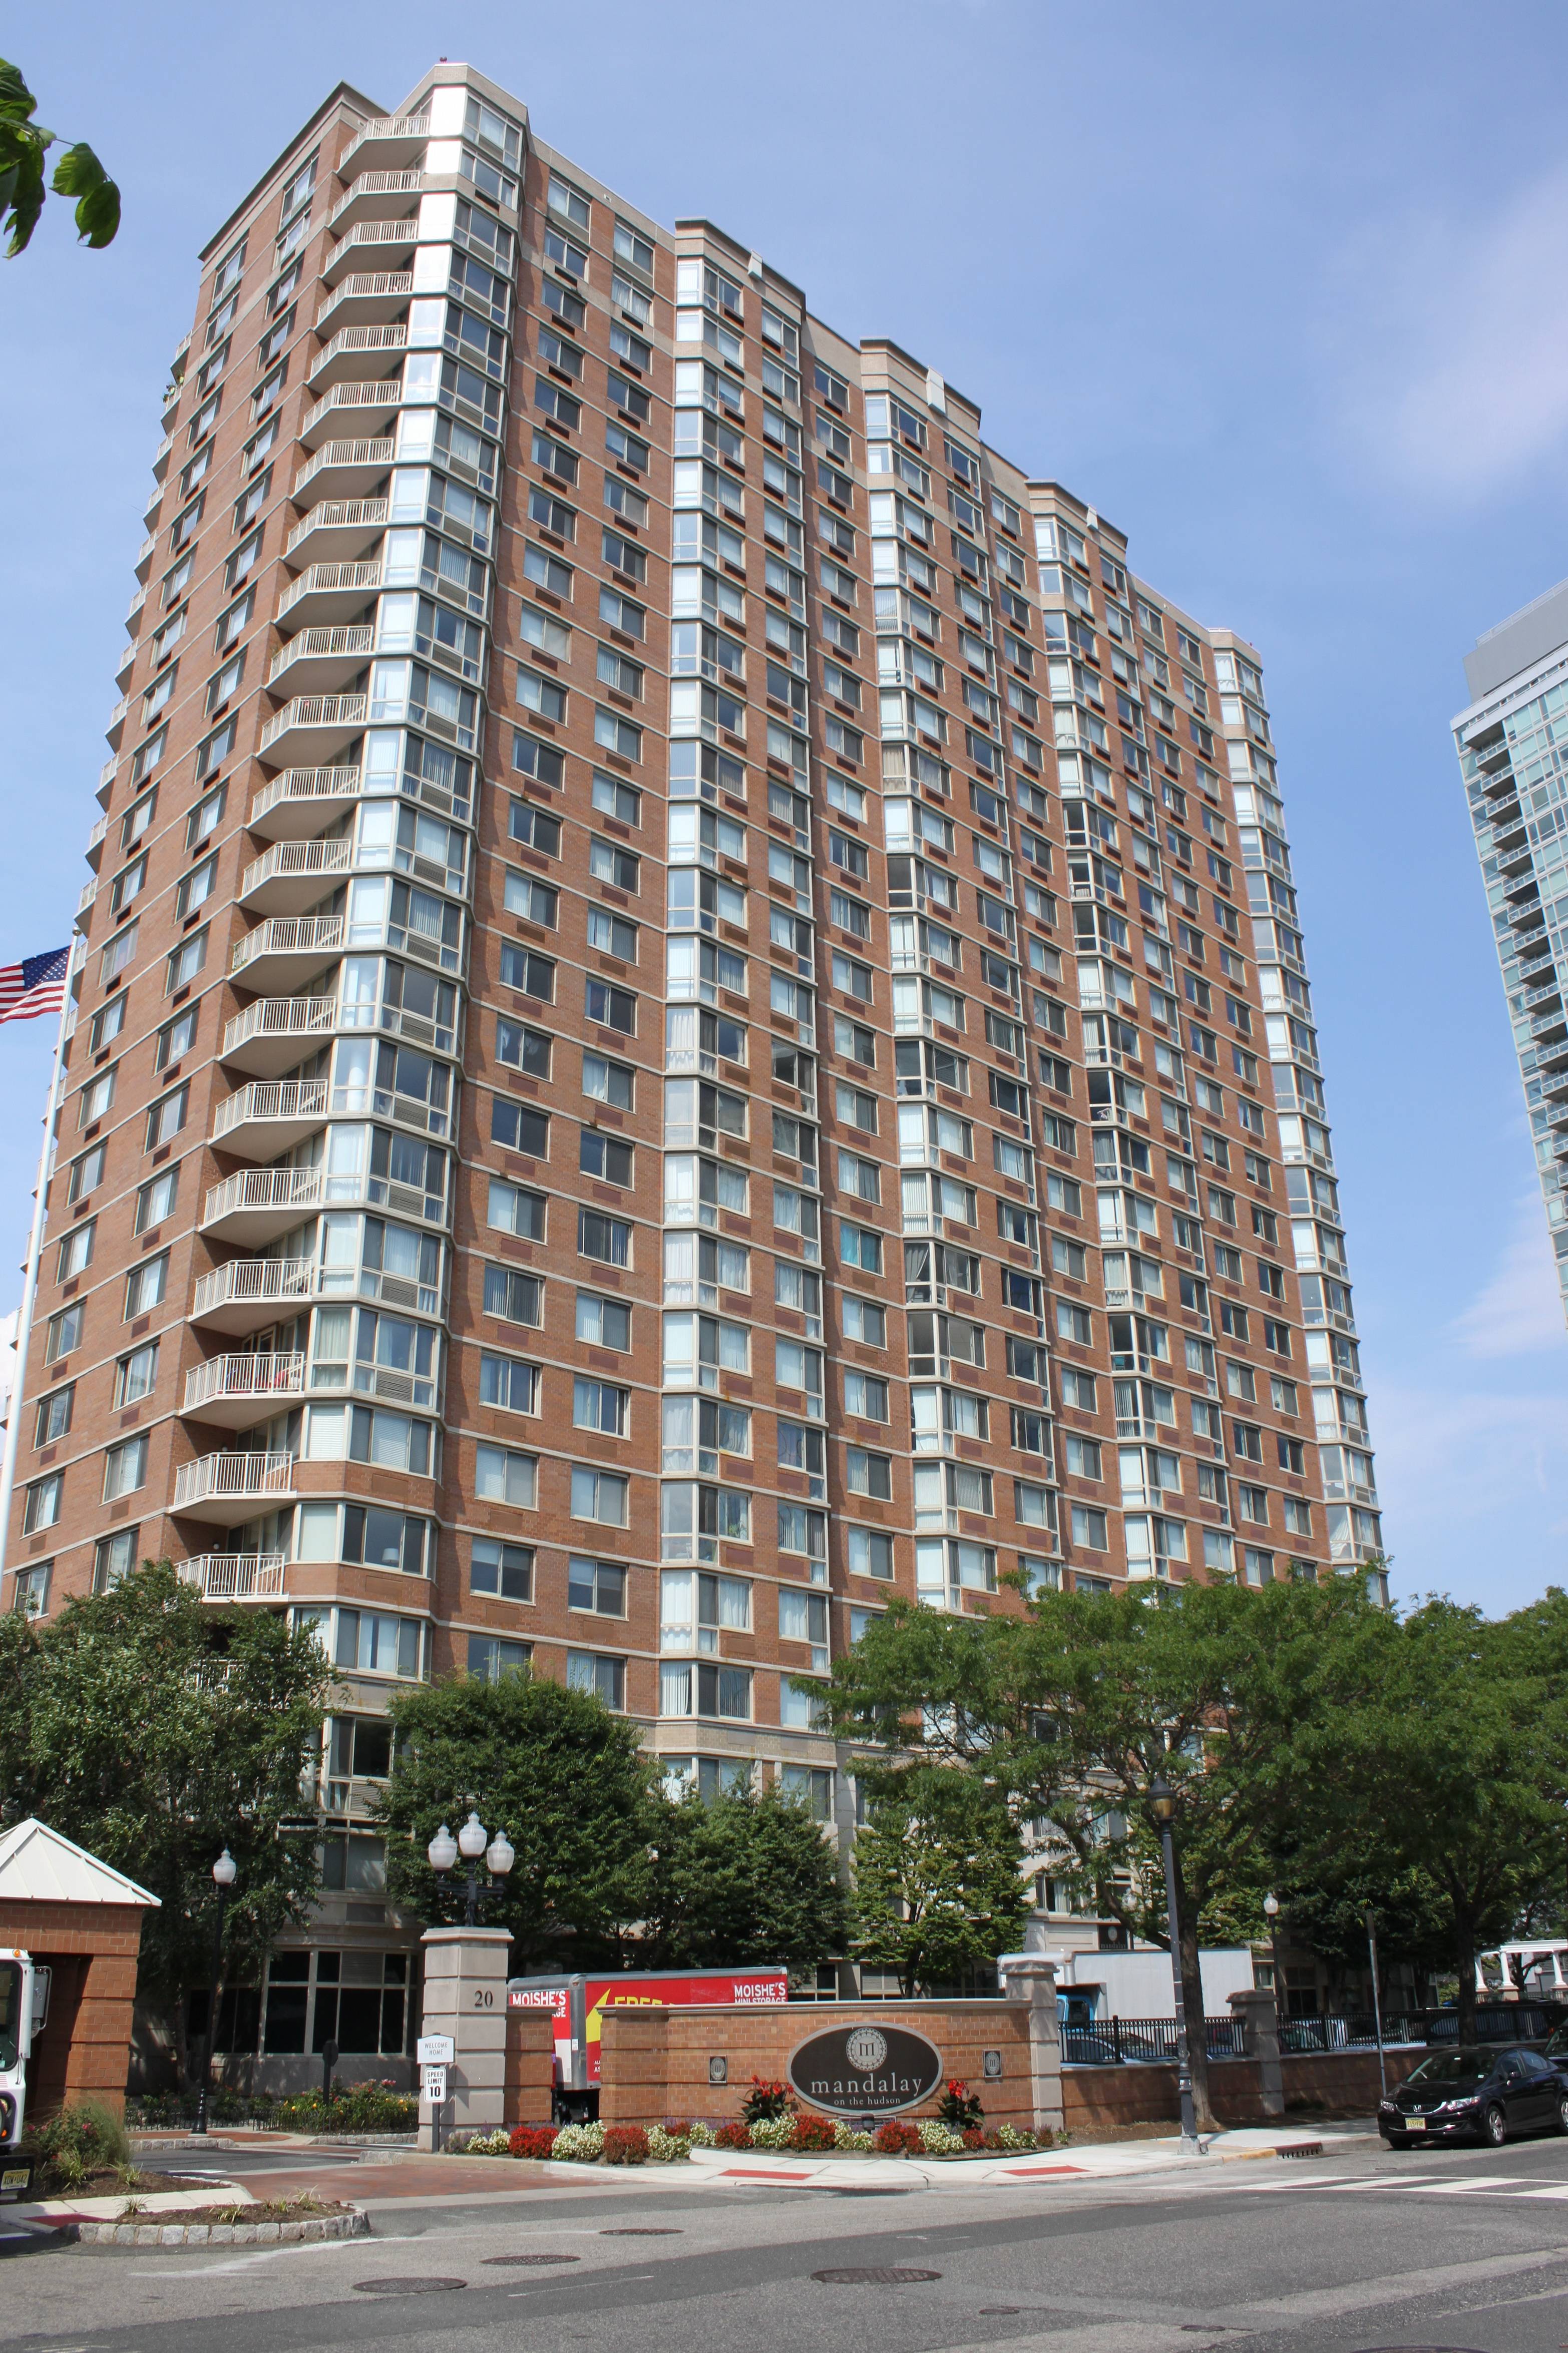 1 Bedroom Waterfront Rental $2,600/m Downtown Jersey City